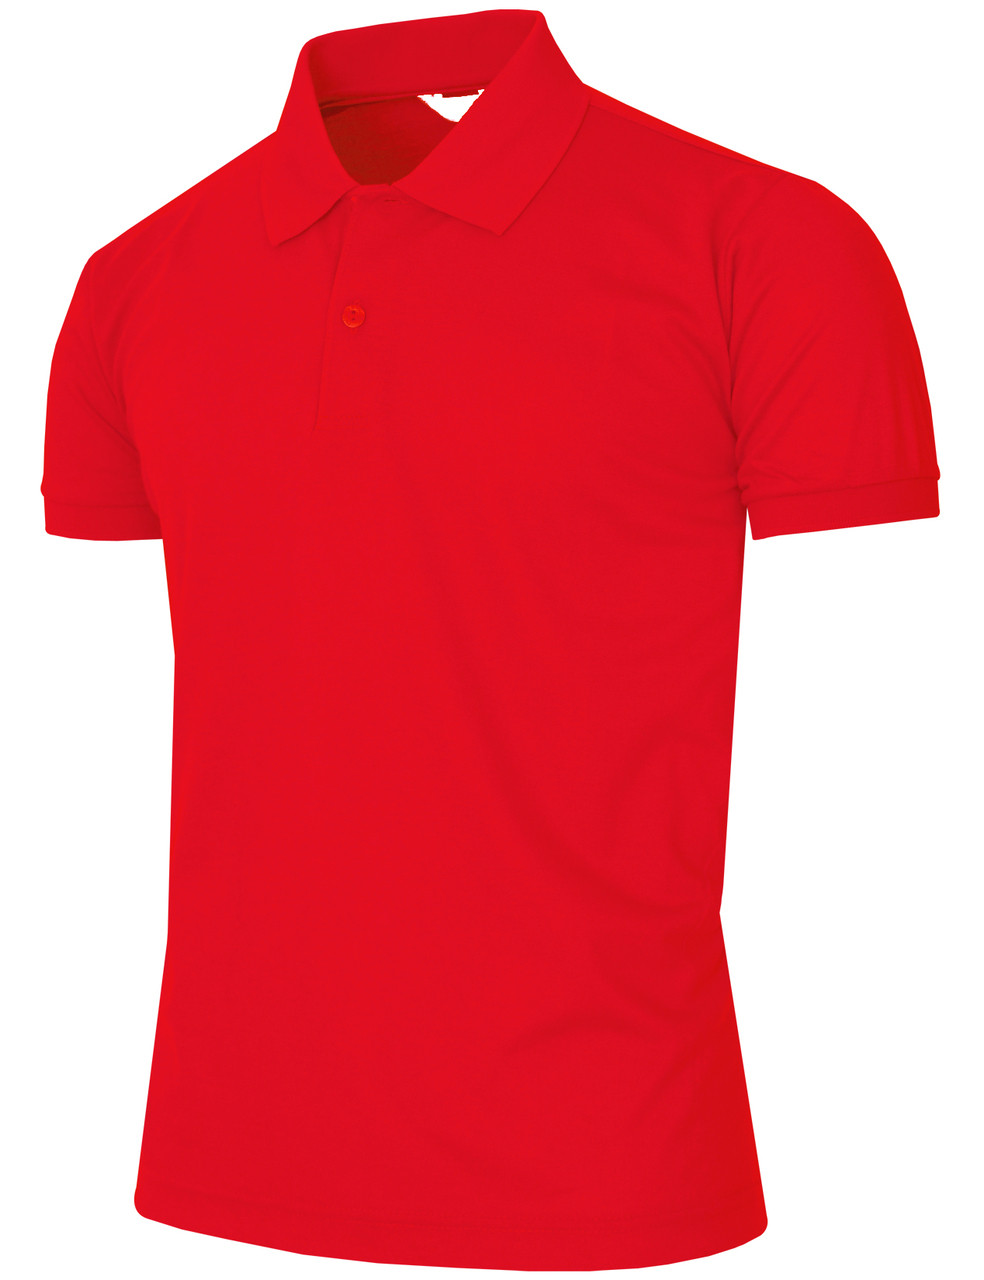 BCPOLO Solid Polo Shirt Short Sleeve Sportswear-5 colors-Unisex